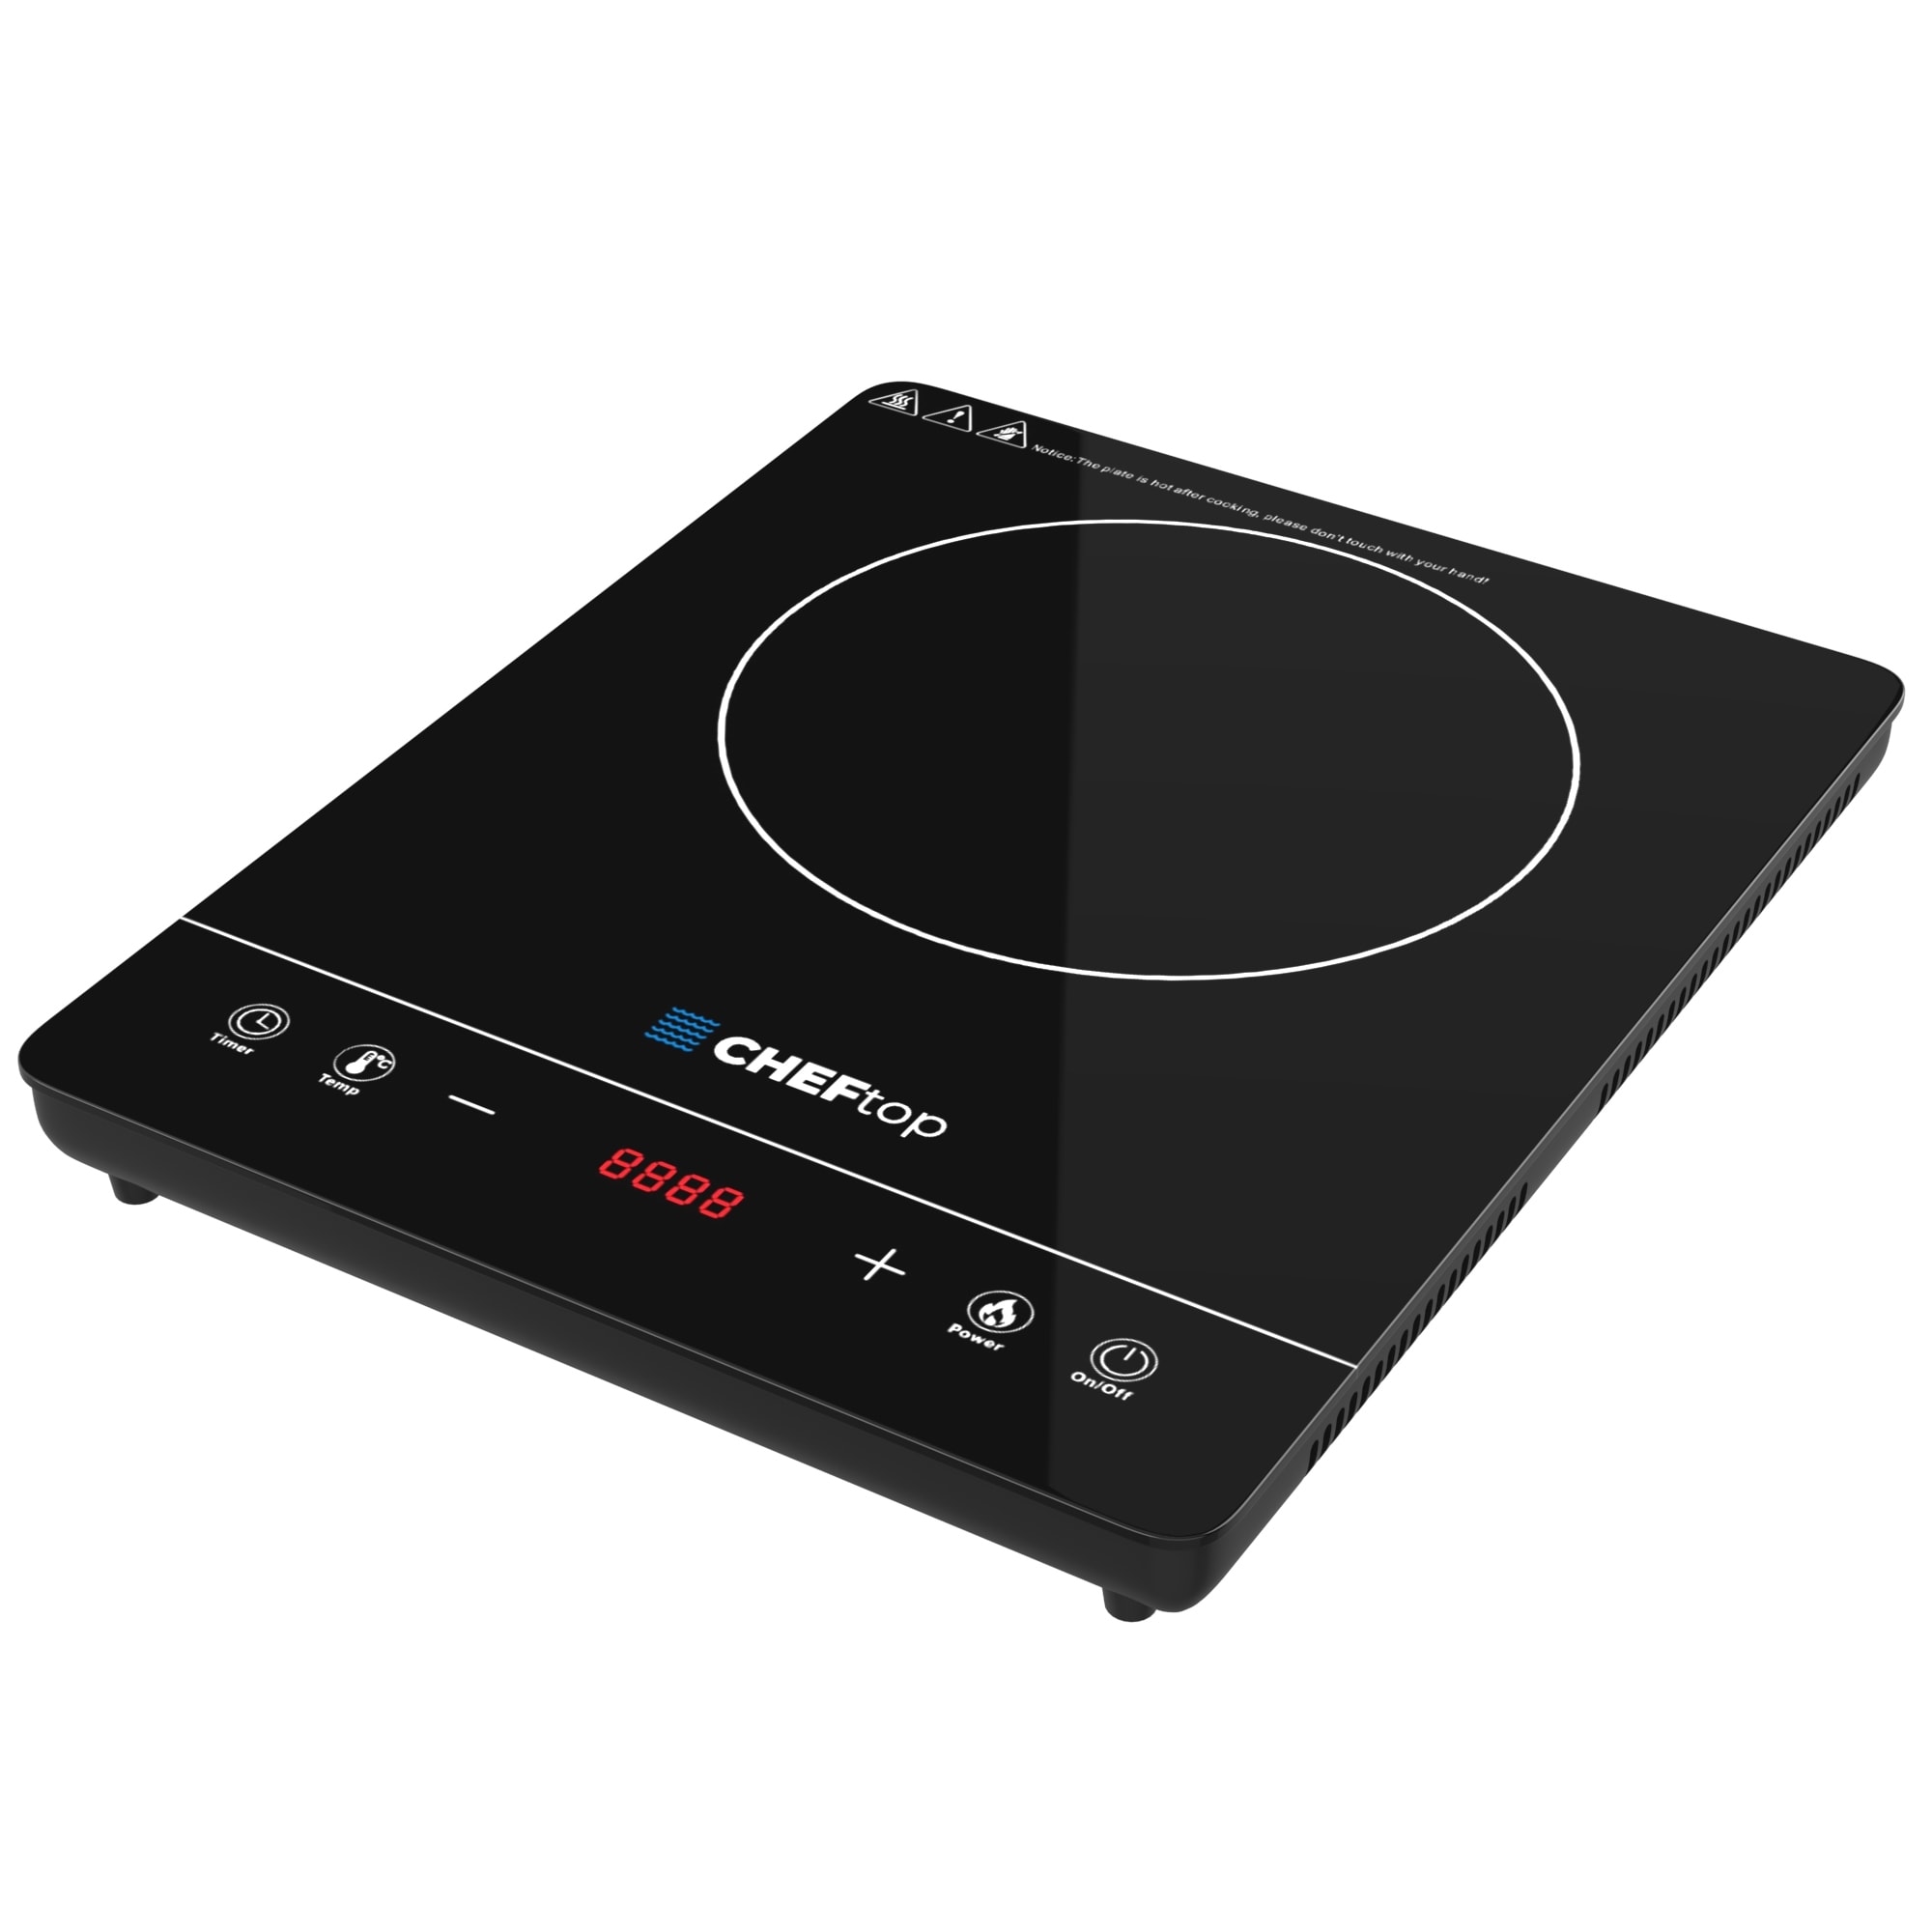 https://ak1.ostkcdn.com/images/products/is/images/direct/f8d95dd7572d178ee870c9f36ce225478a7bdf8f/Cheftop-Induction-Double-Cooktop-Portable-120V-Digital-2-Burner-Electric-Cooktop-1800-Watt%2C-Digital-9-Cooking-Zones-Power-Levels.jpg